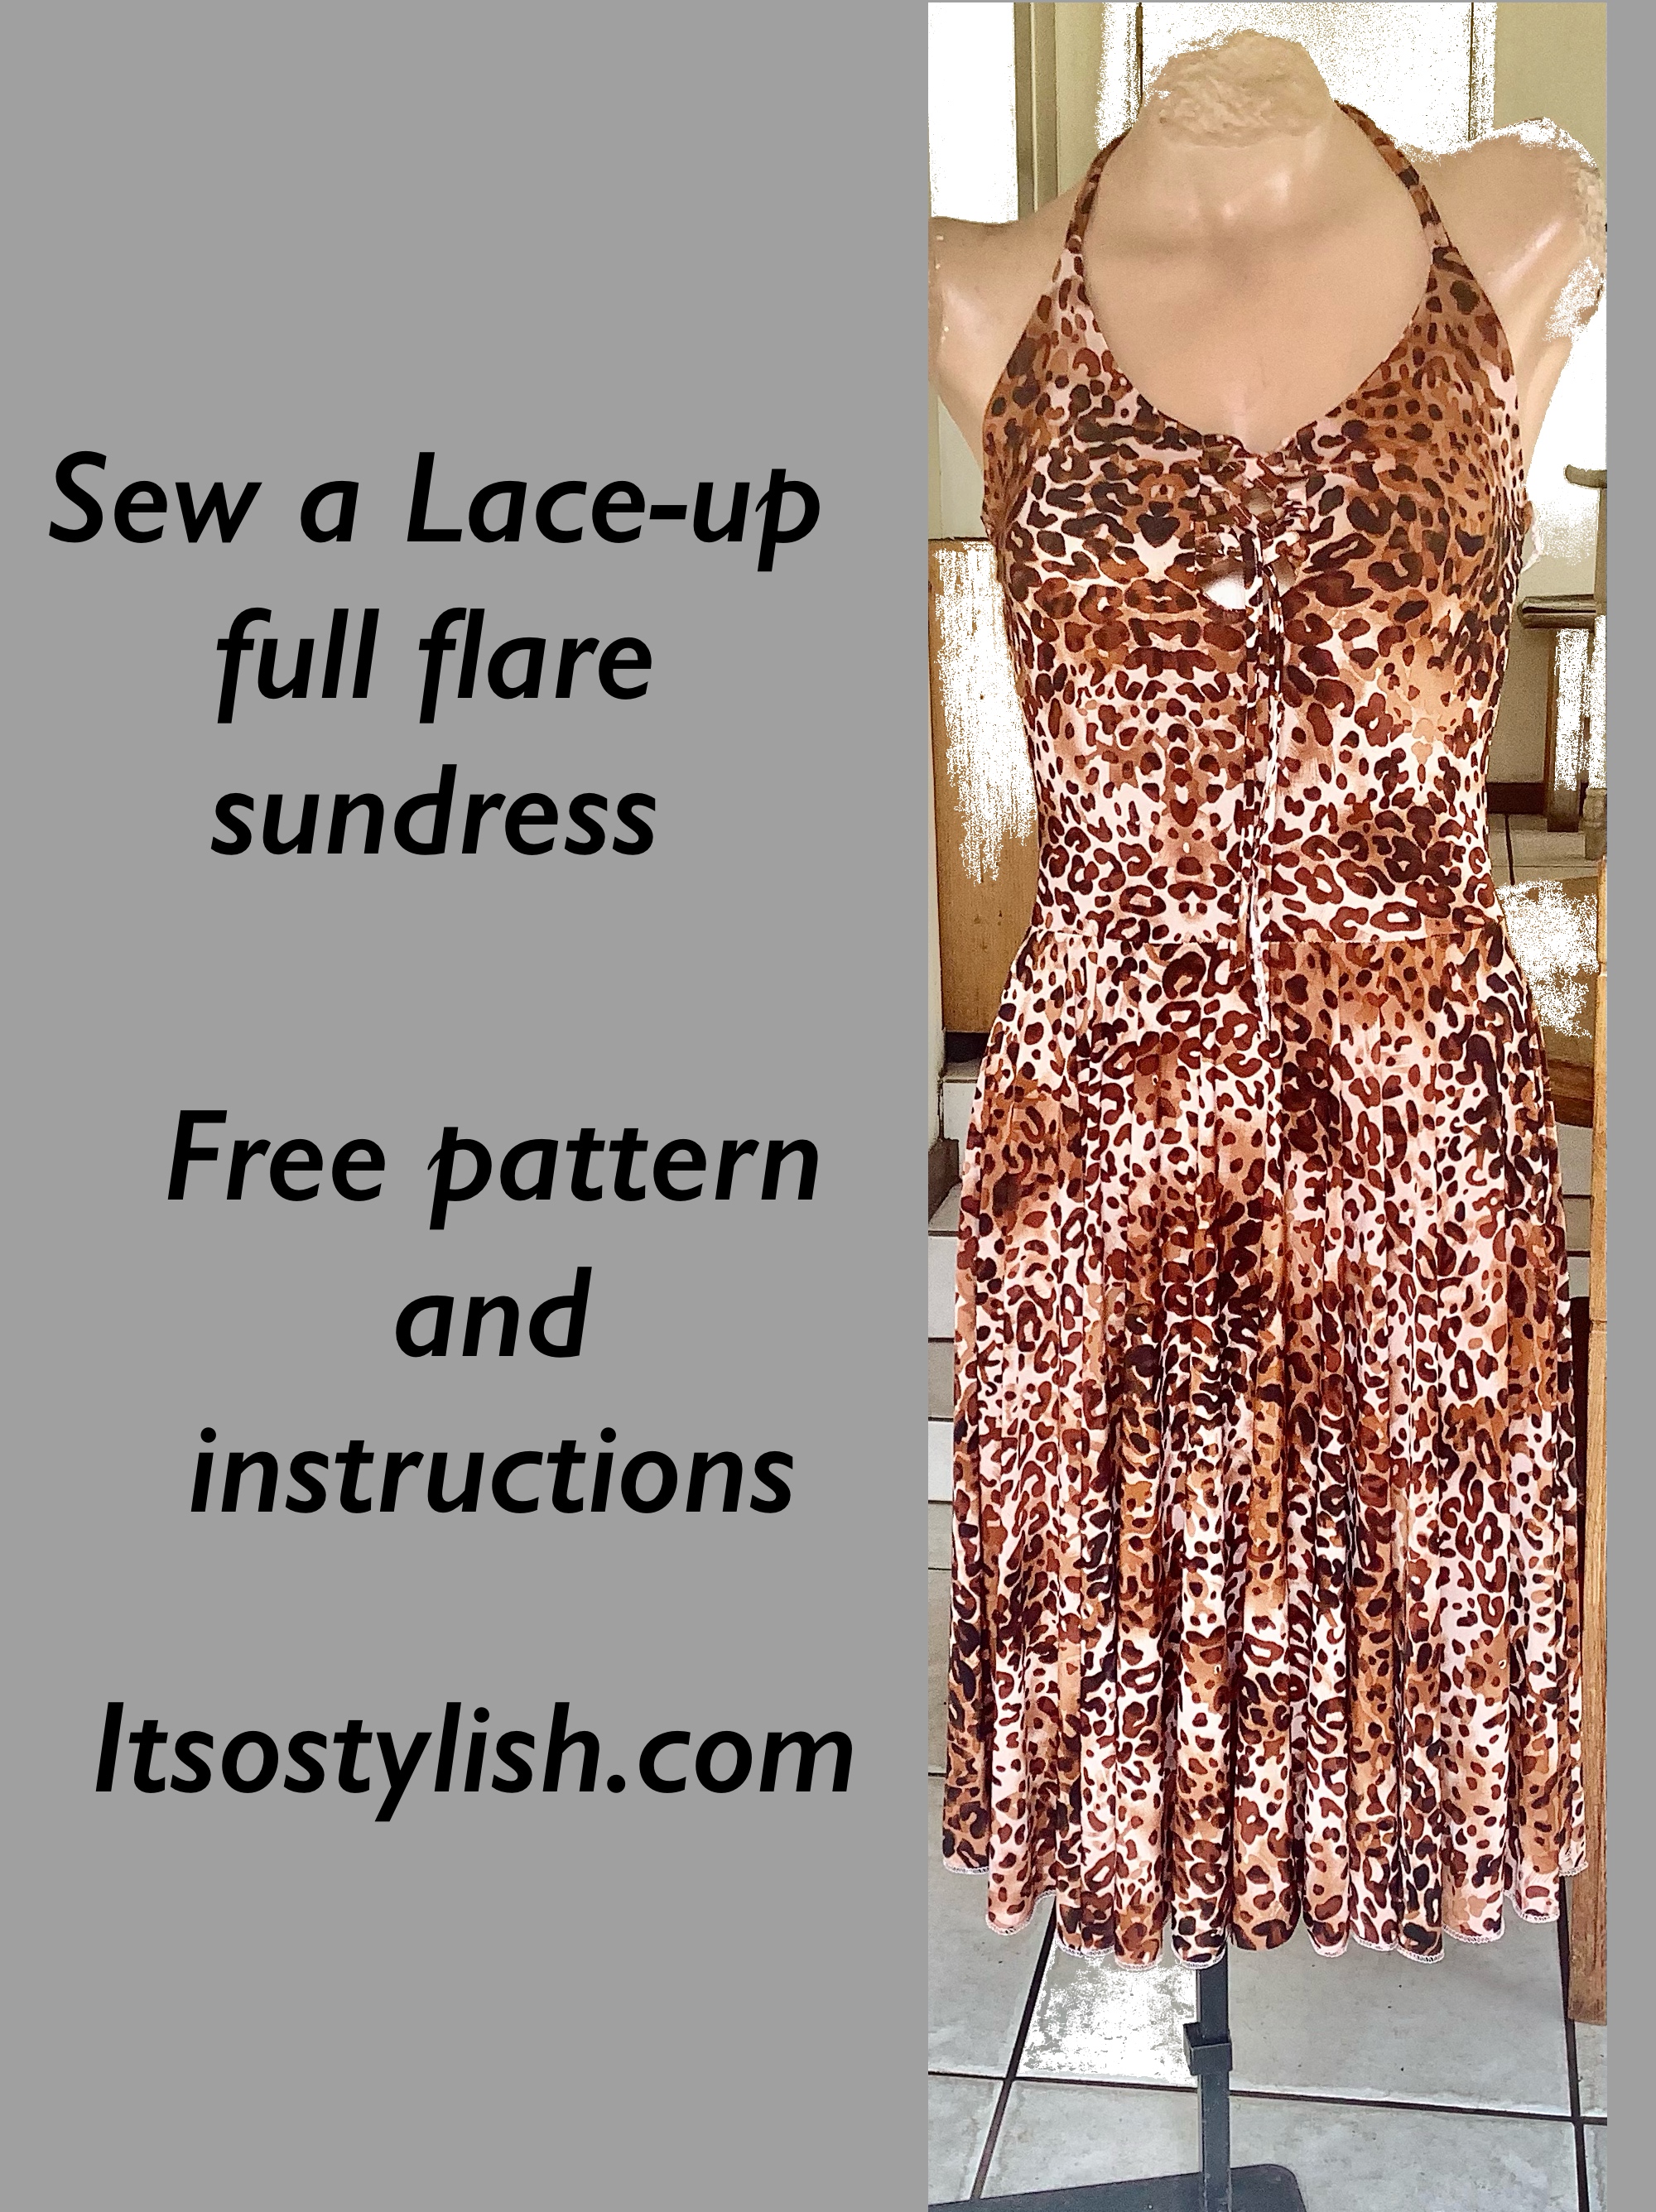 How to sew a Lace up front sundress